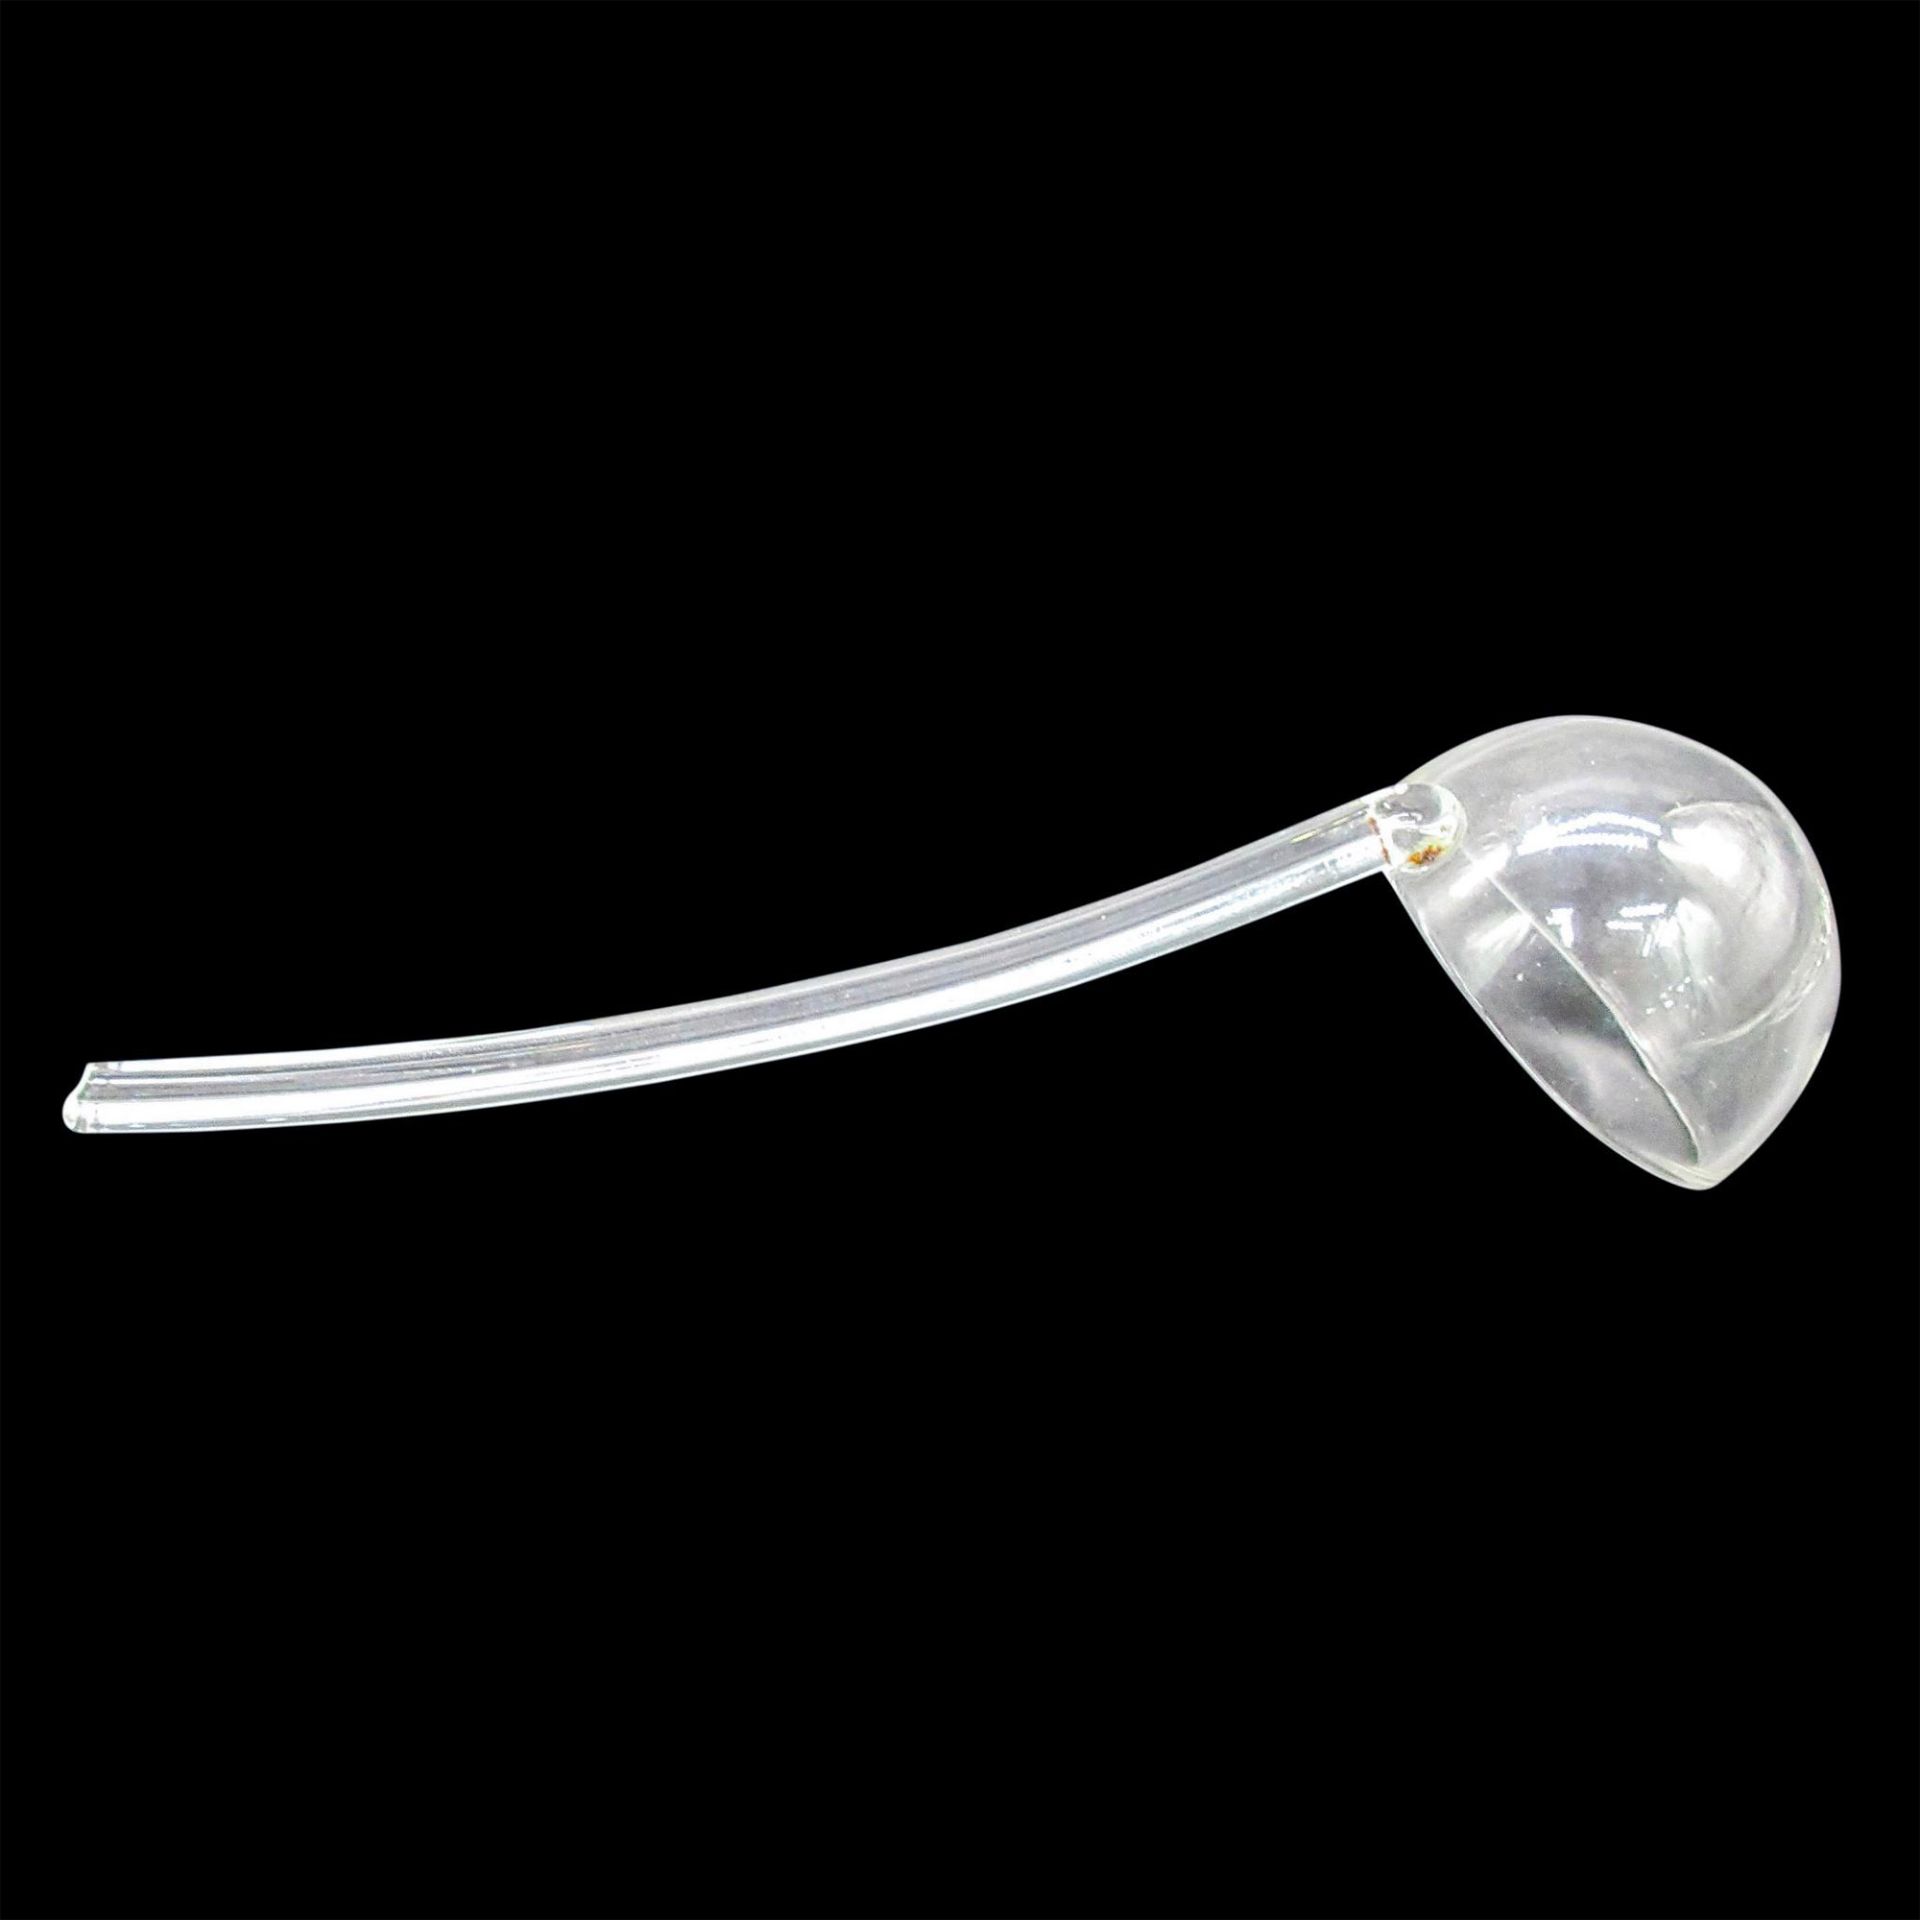 5pc Small Glass Ladles - Image 4 of 16